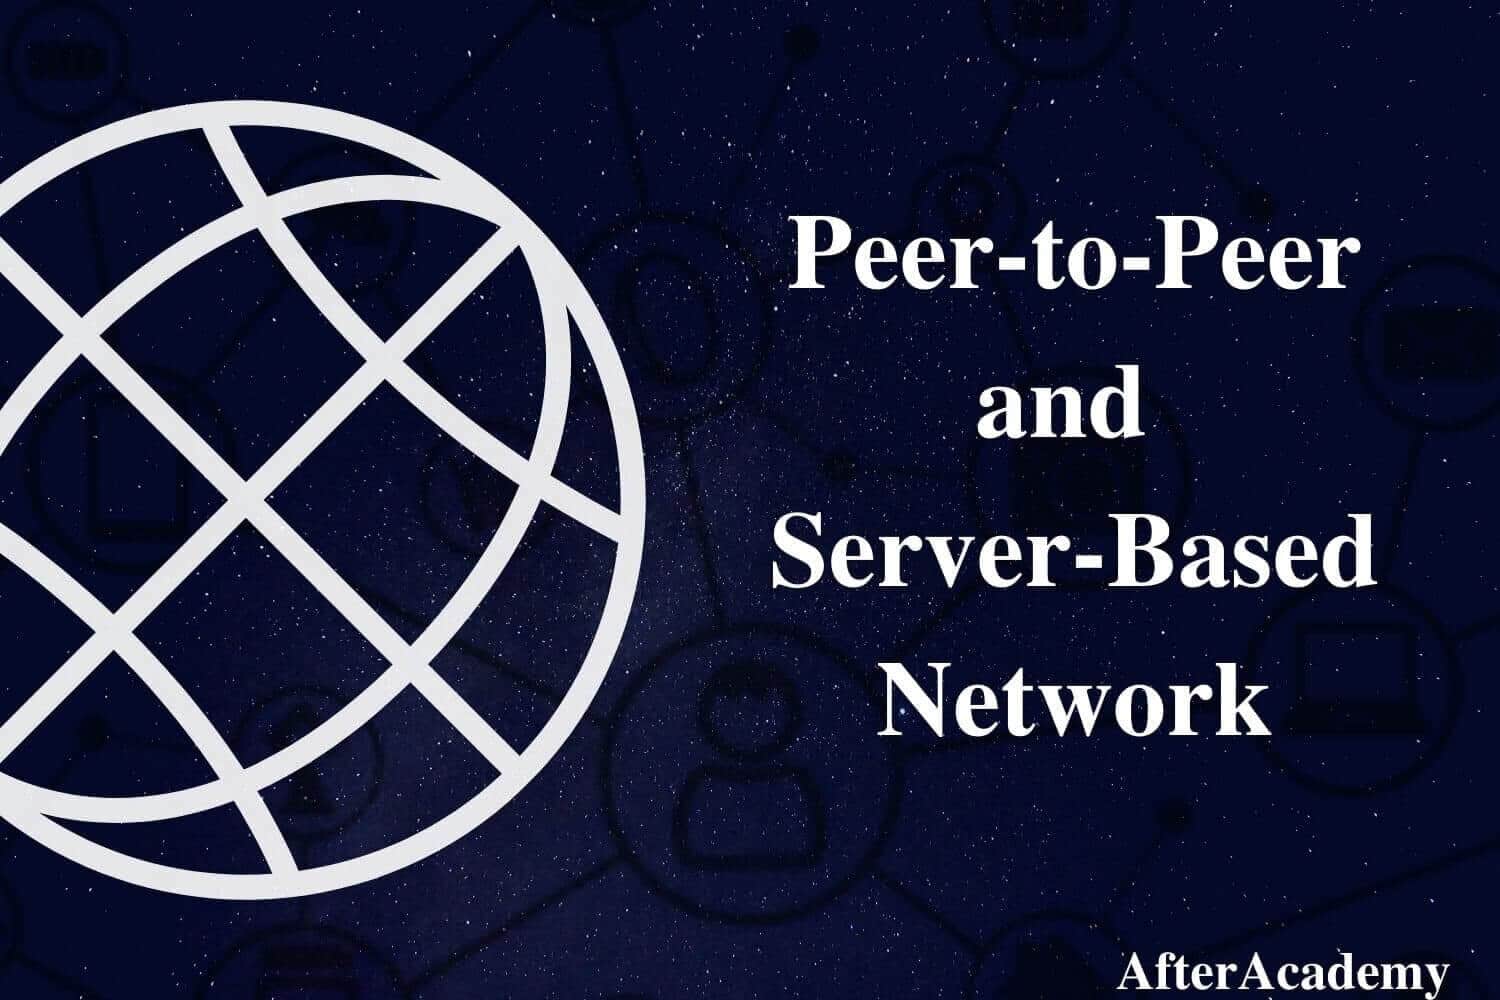 What are Peer-to-Peer networks and Server-Based networks?